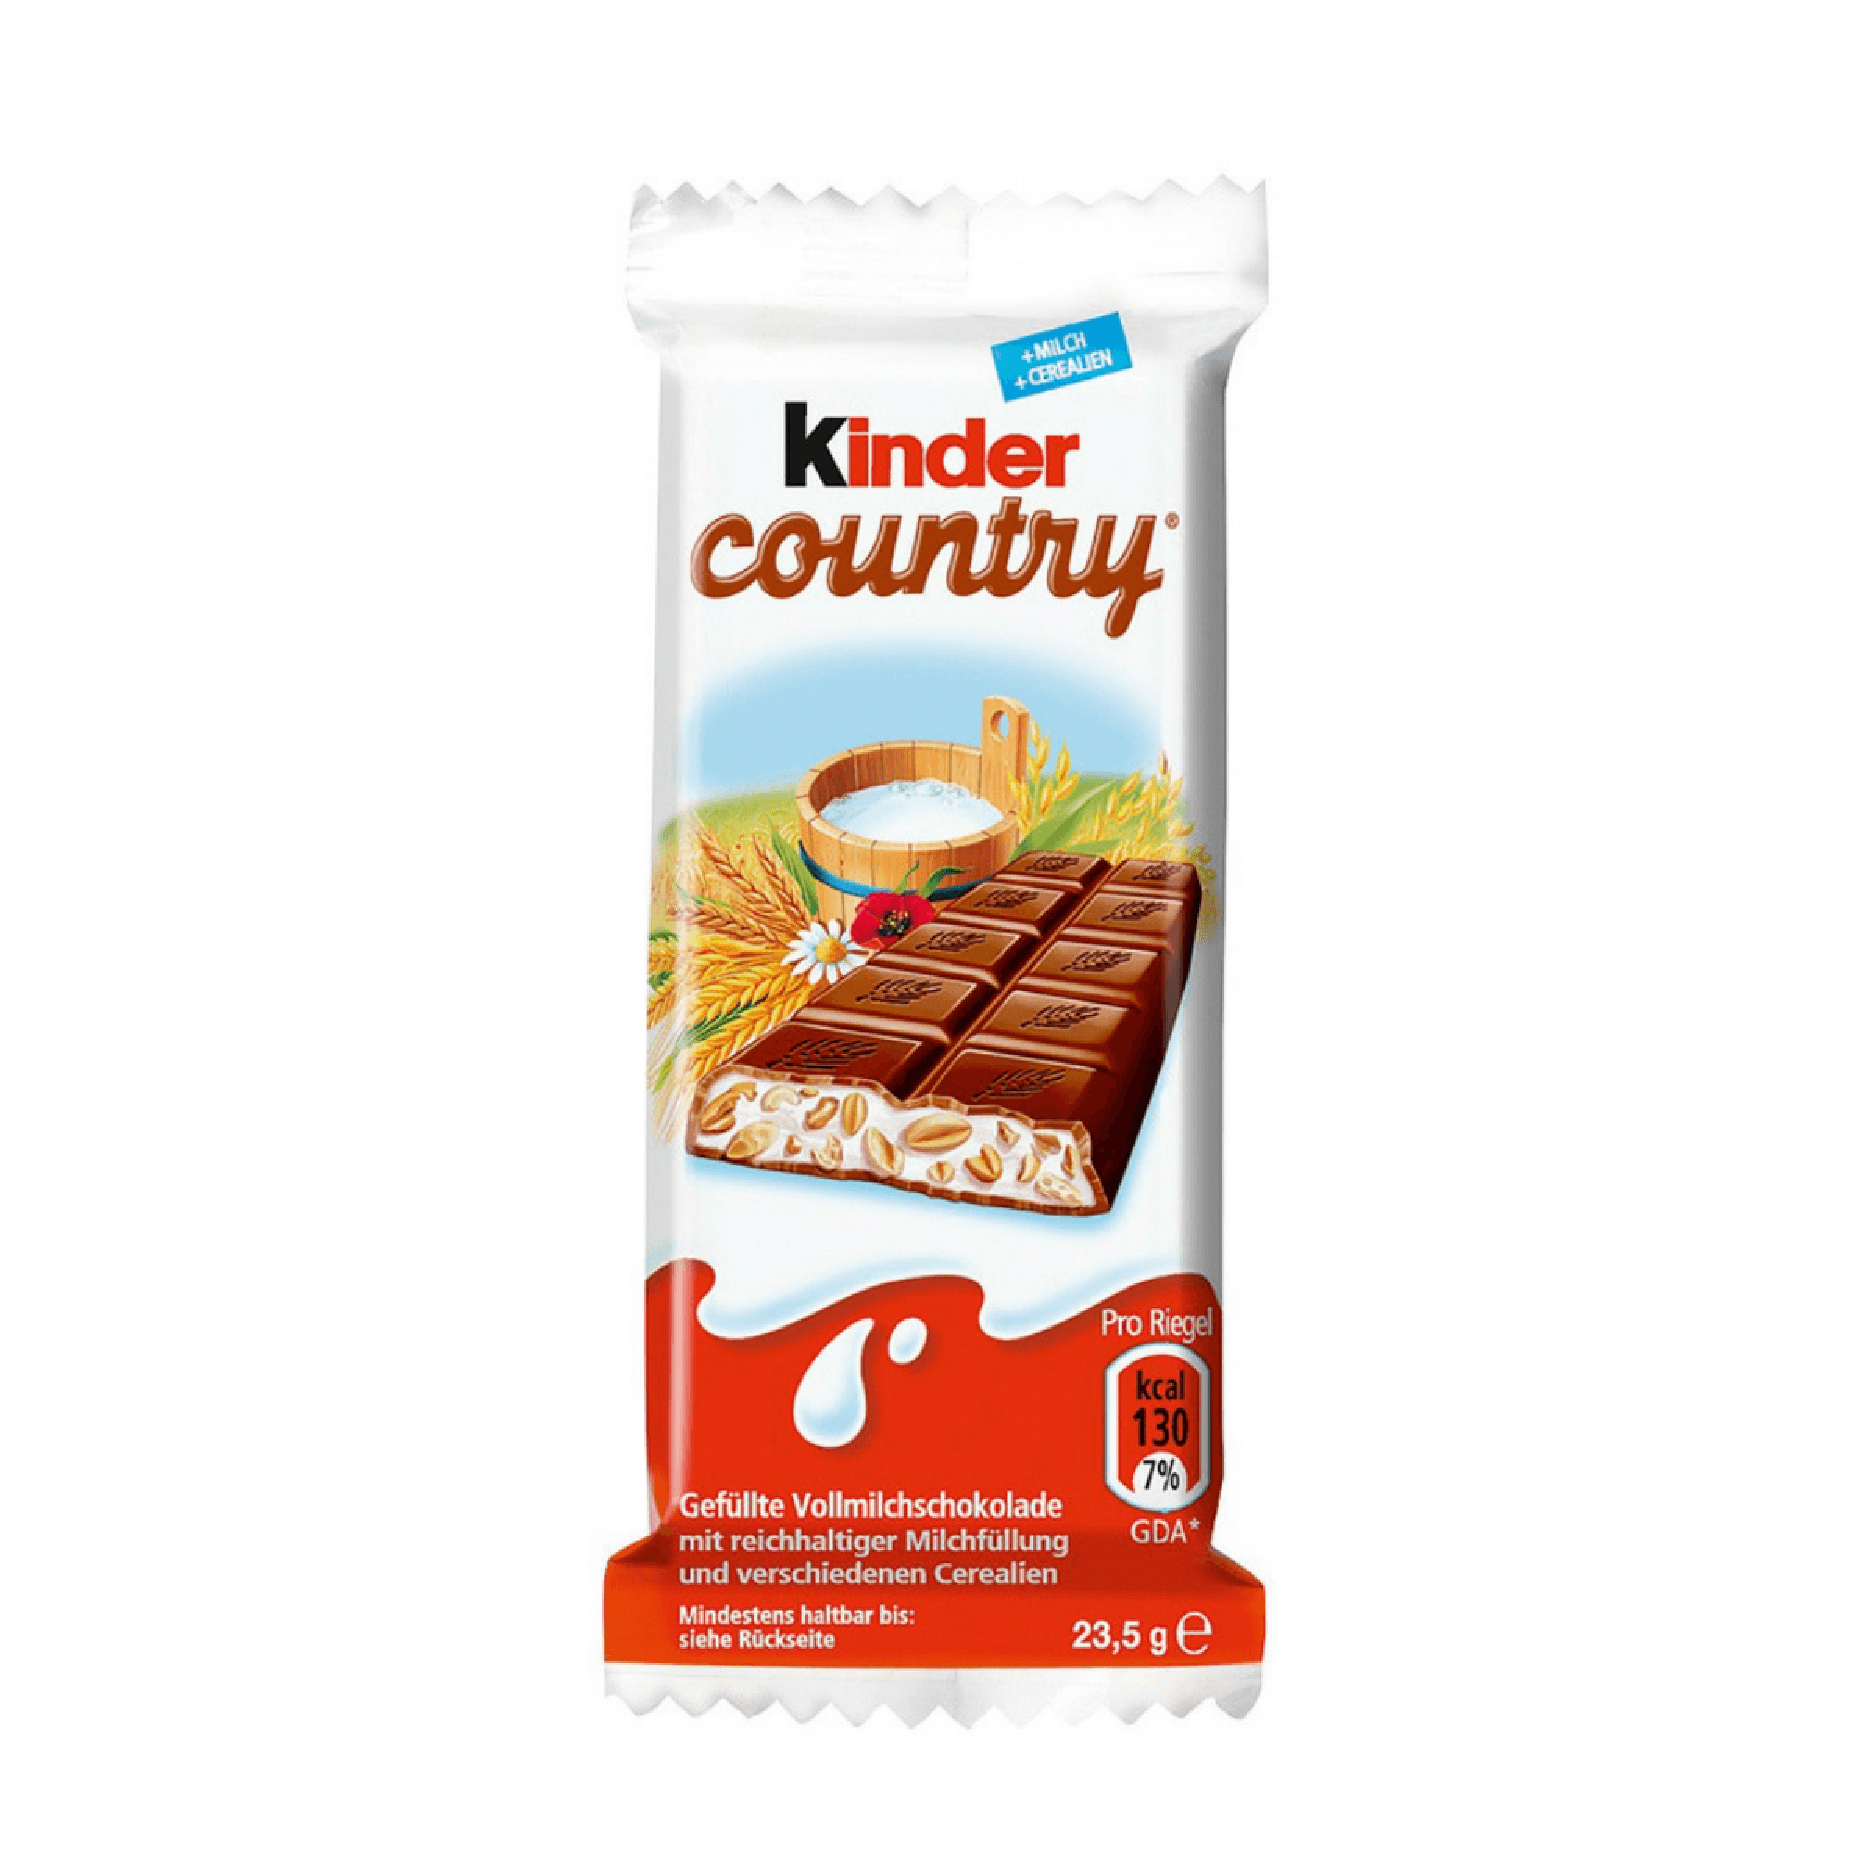 Kinder Country Milk Chocolate 23g - 40 Pack